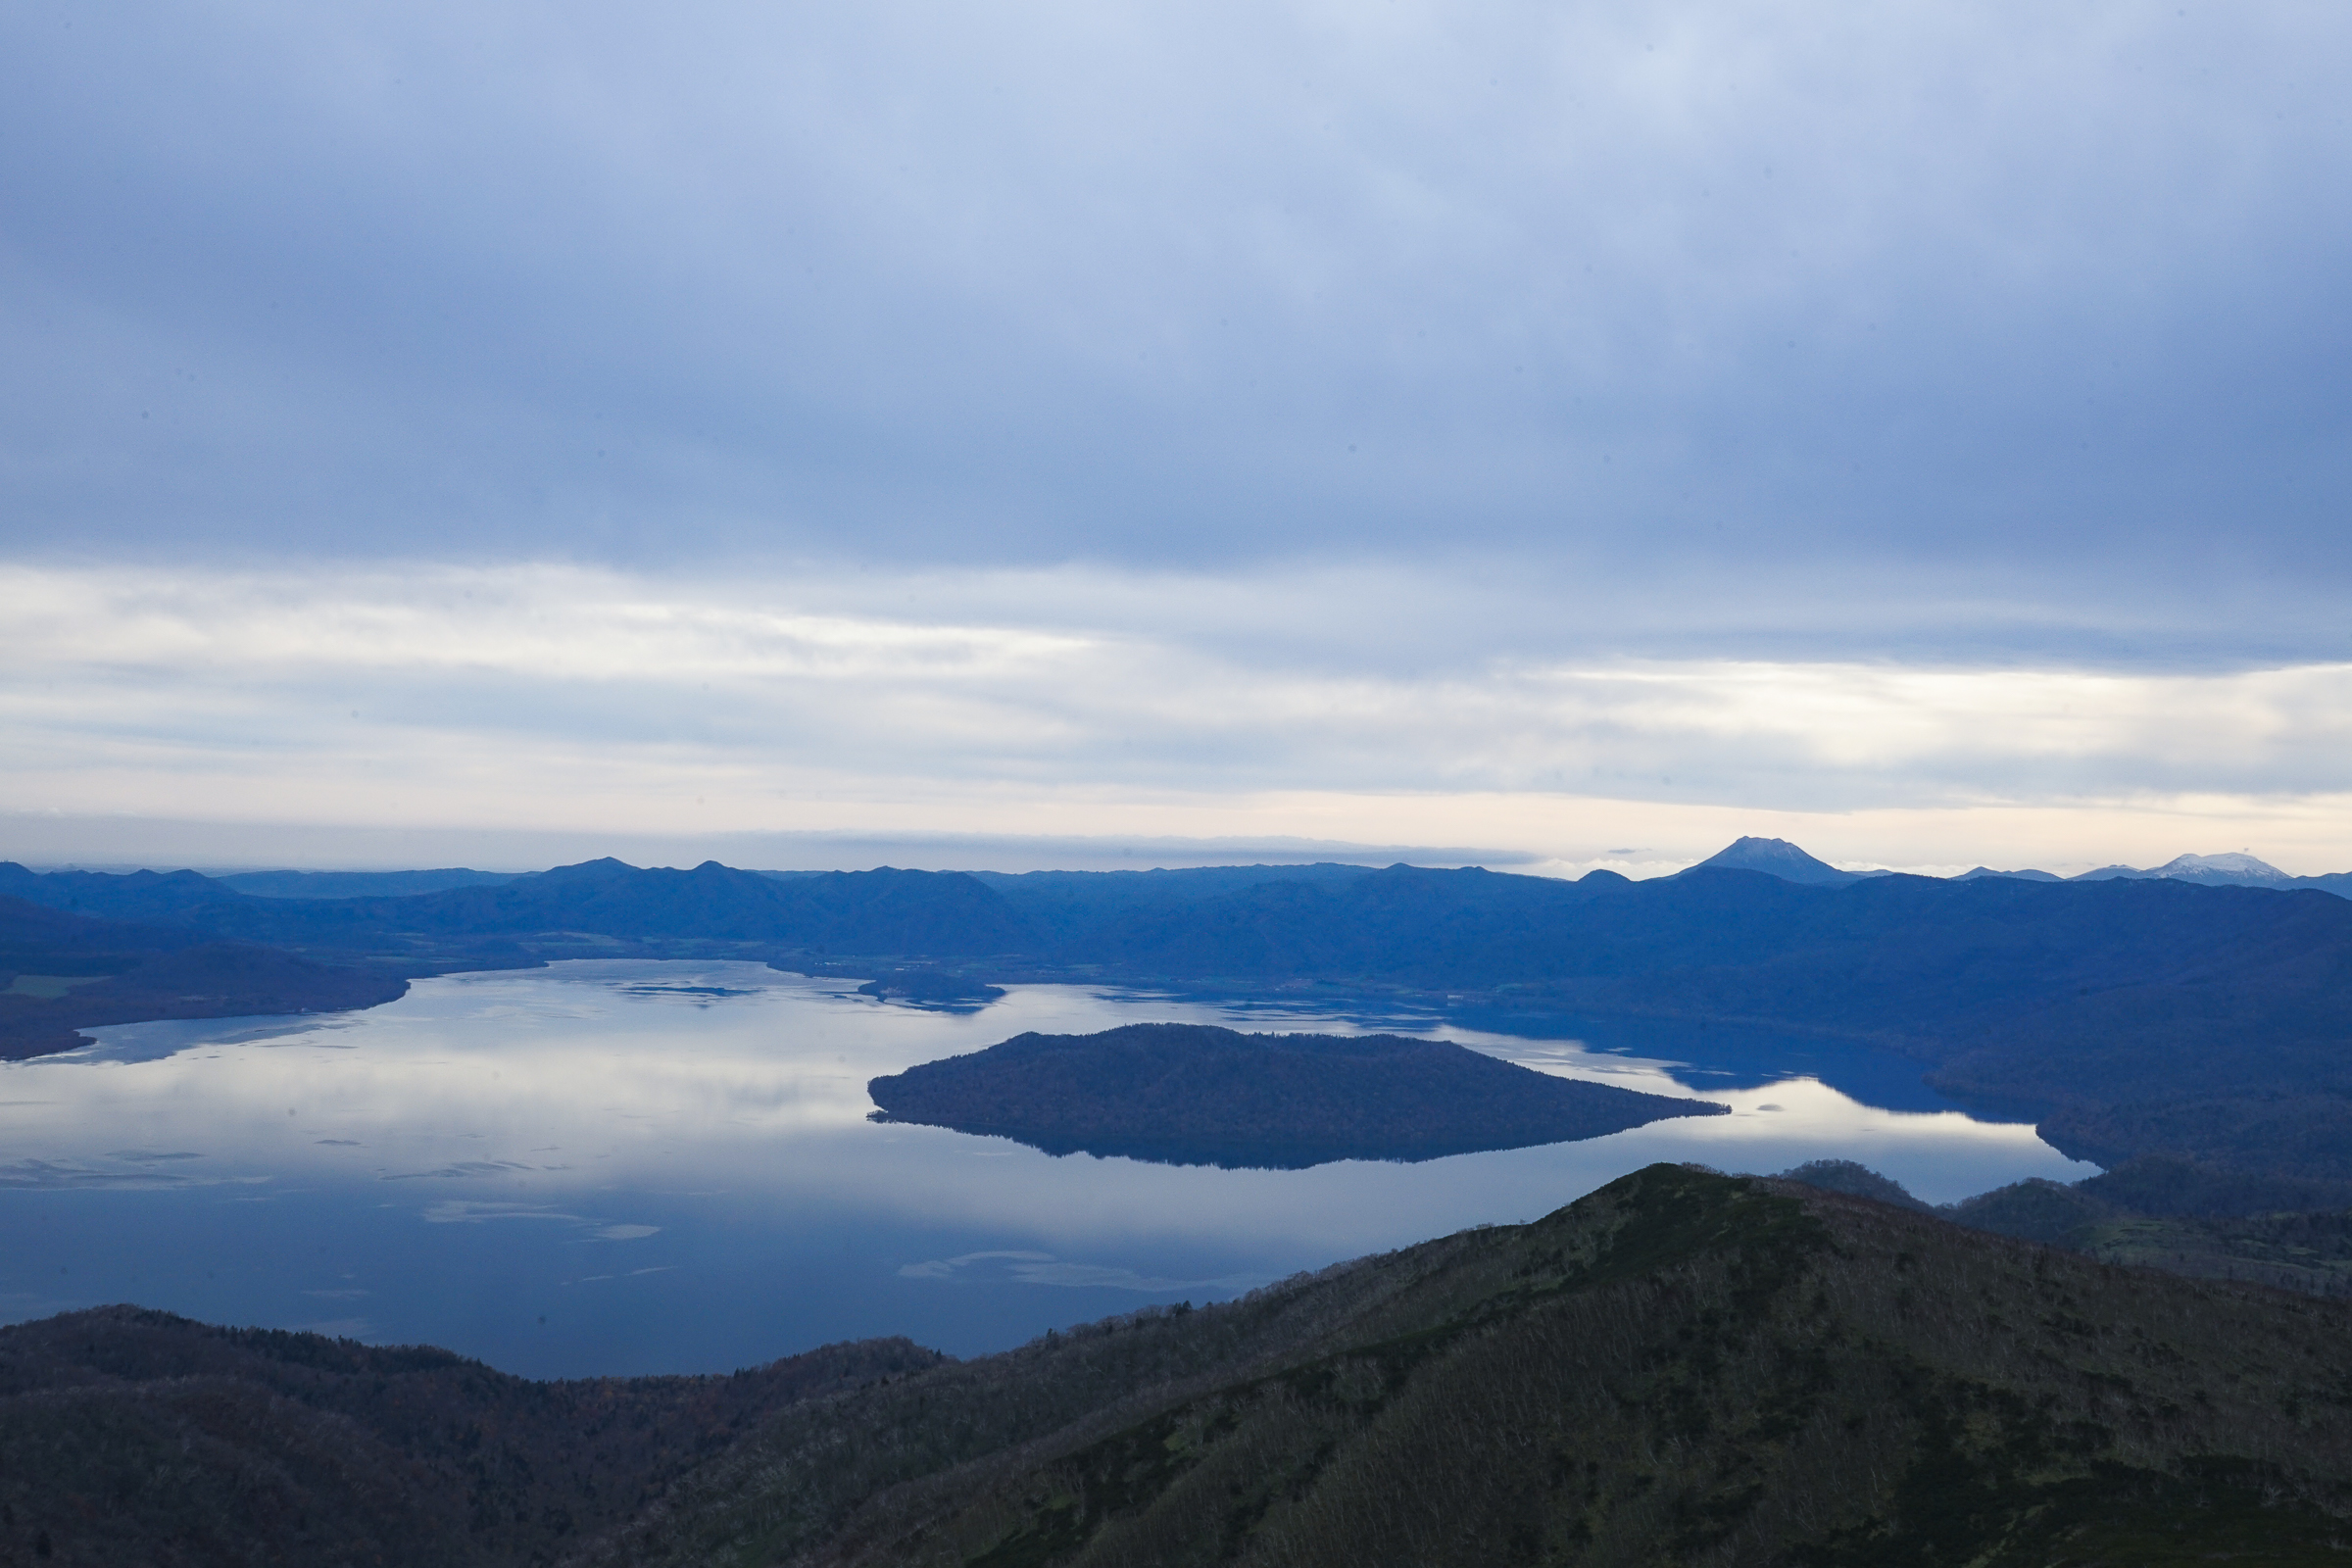 Nakajima island floats in the middle of Lake Kussharo on a calm day. Viewed from high on Mt Mokoto, the lake seems like a mirror, reflecting the other peaks of the Akan–Mashu National Park